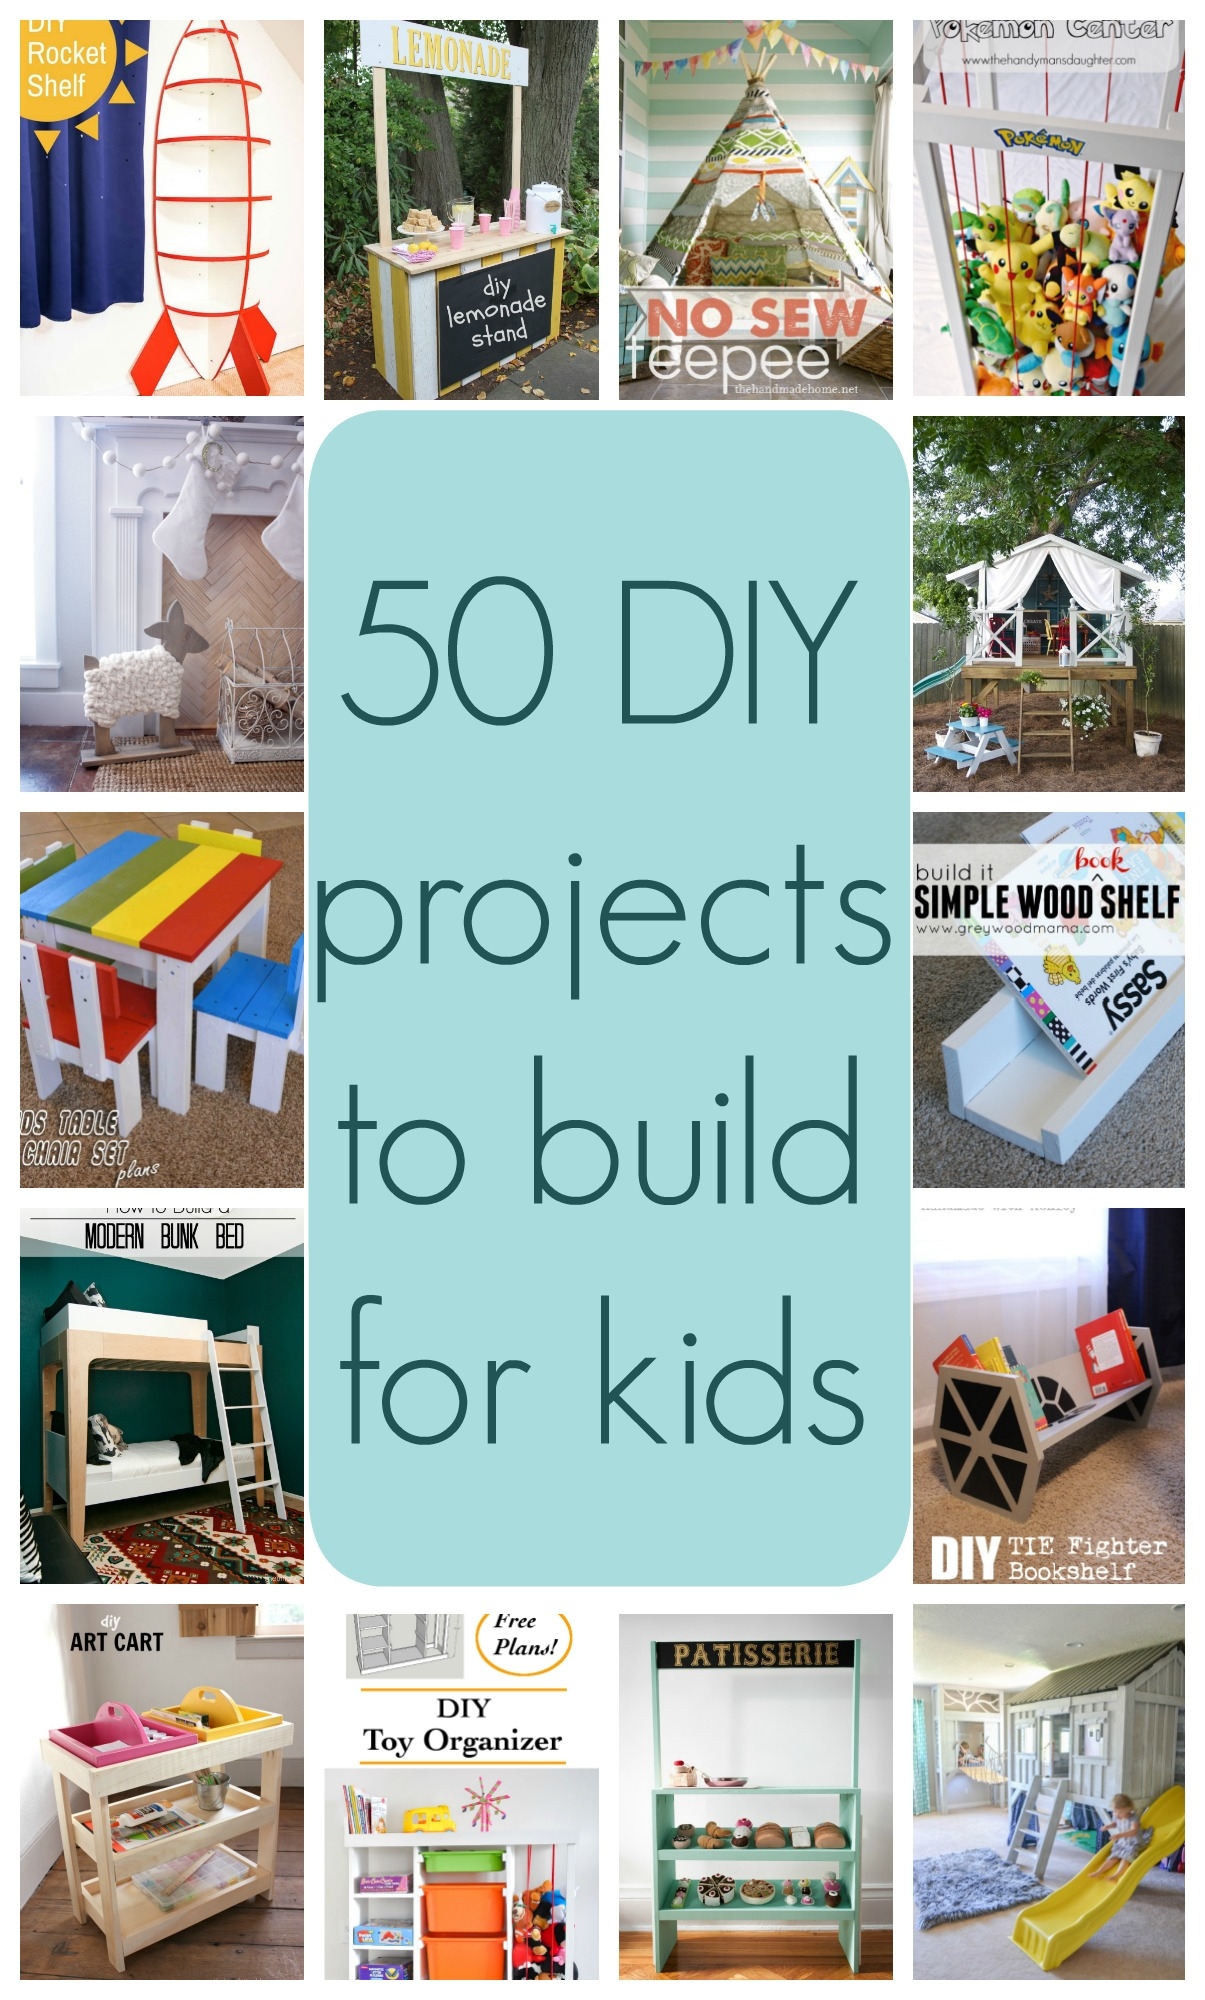 50 DIY projects to build for kids: Part 1 - The Created Home